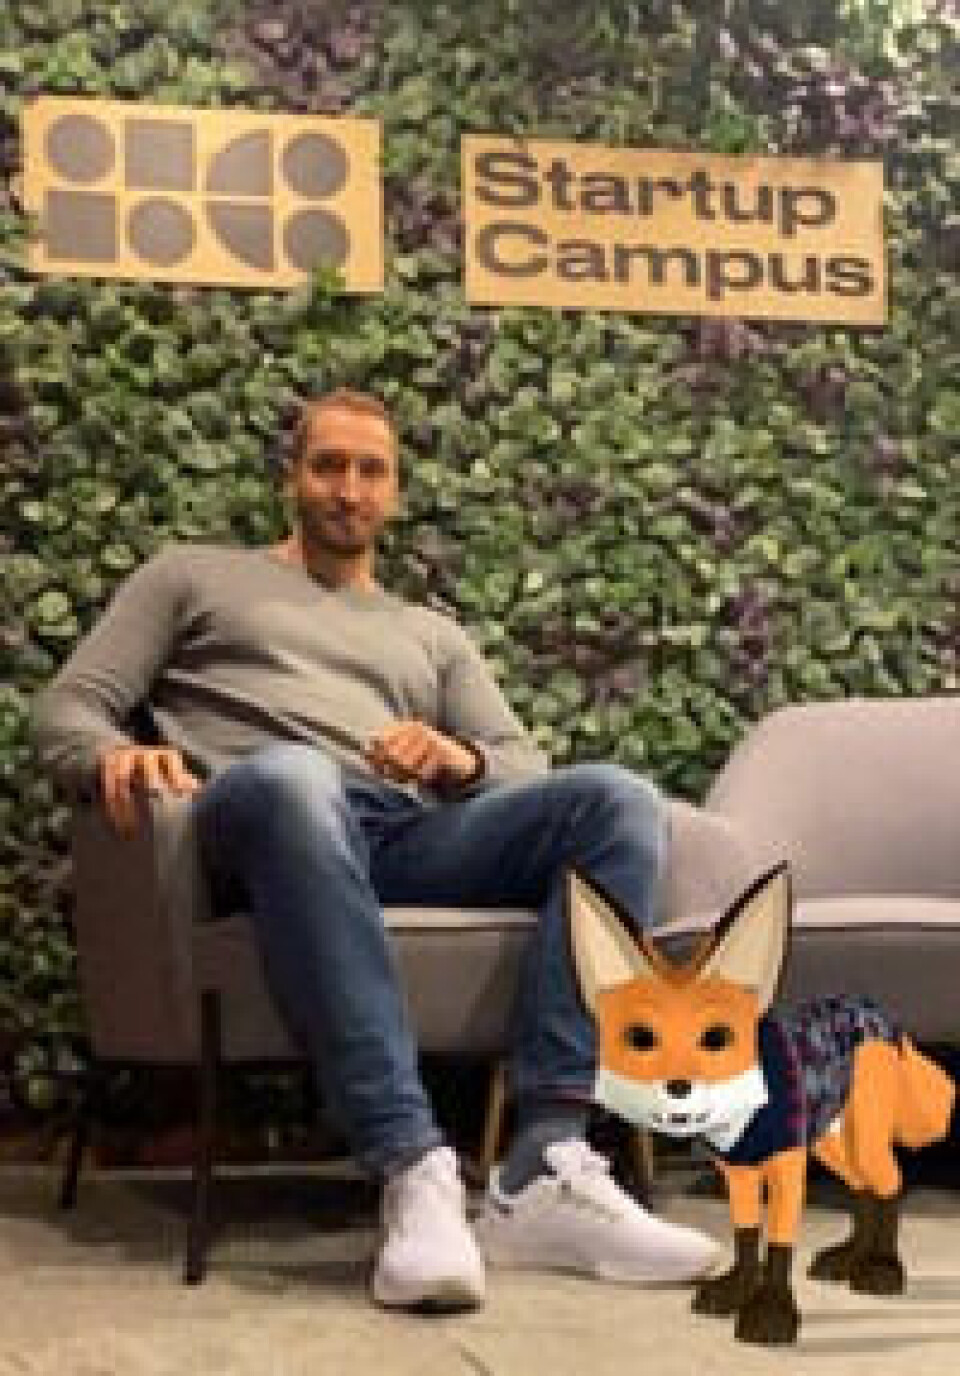 ... and here is Mathias Grønstad with the fox.